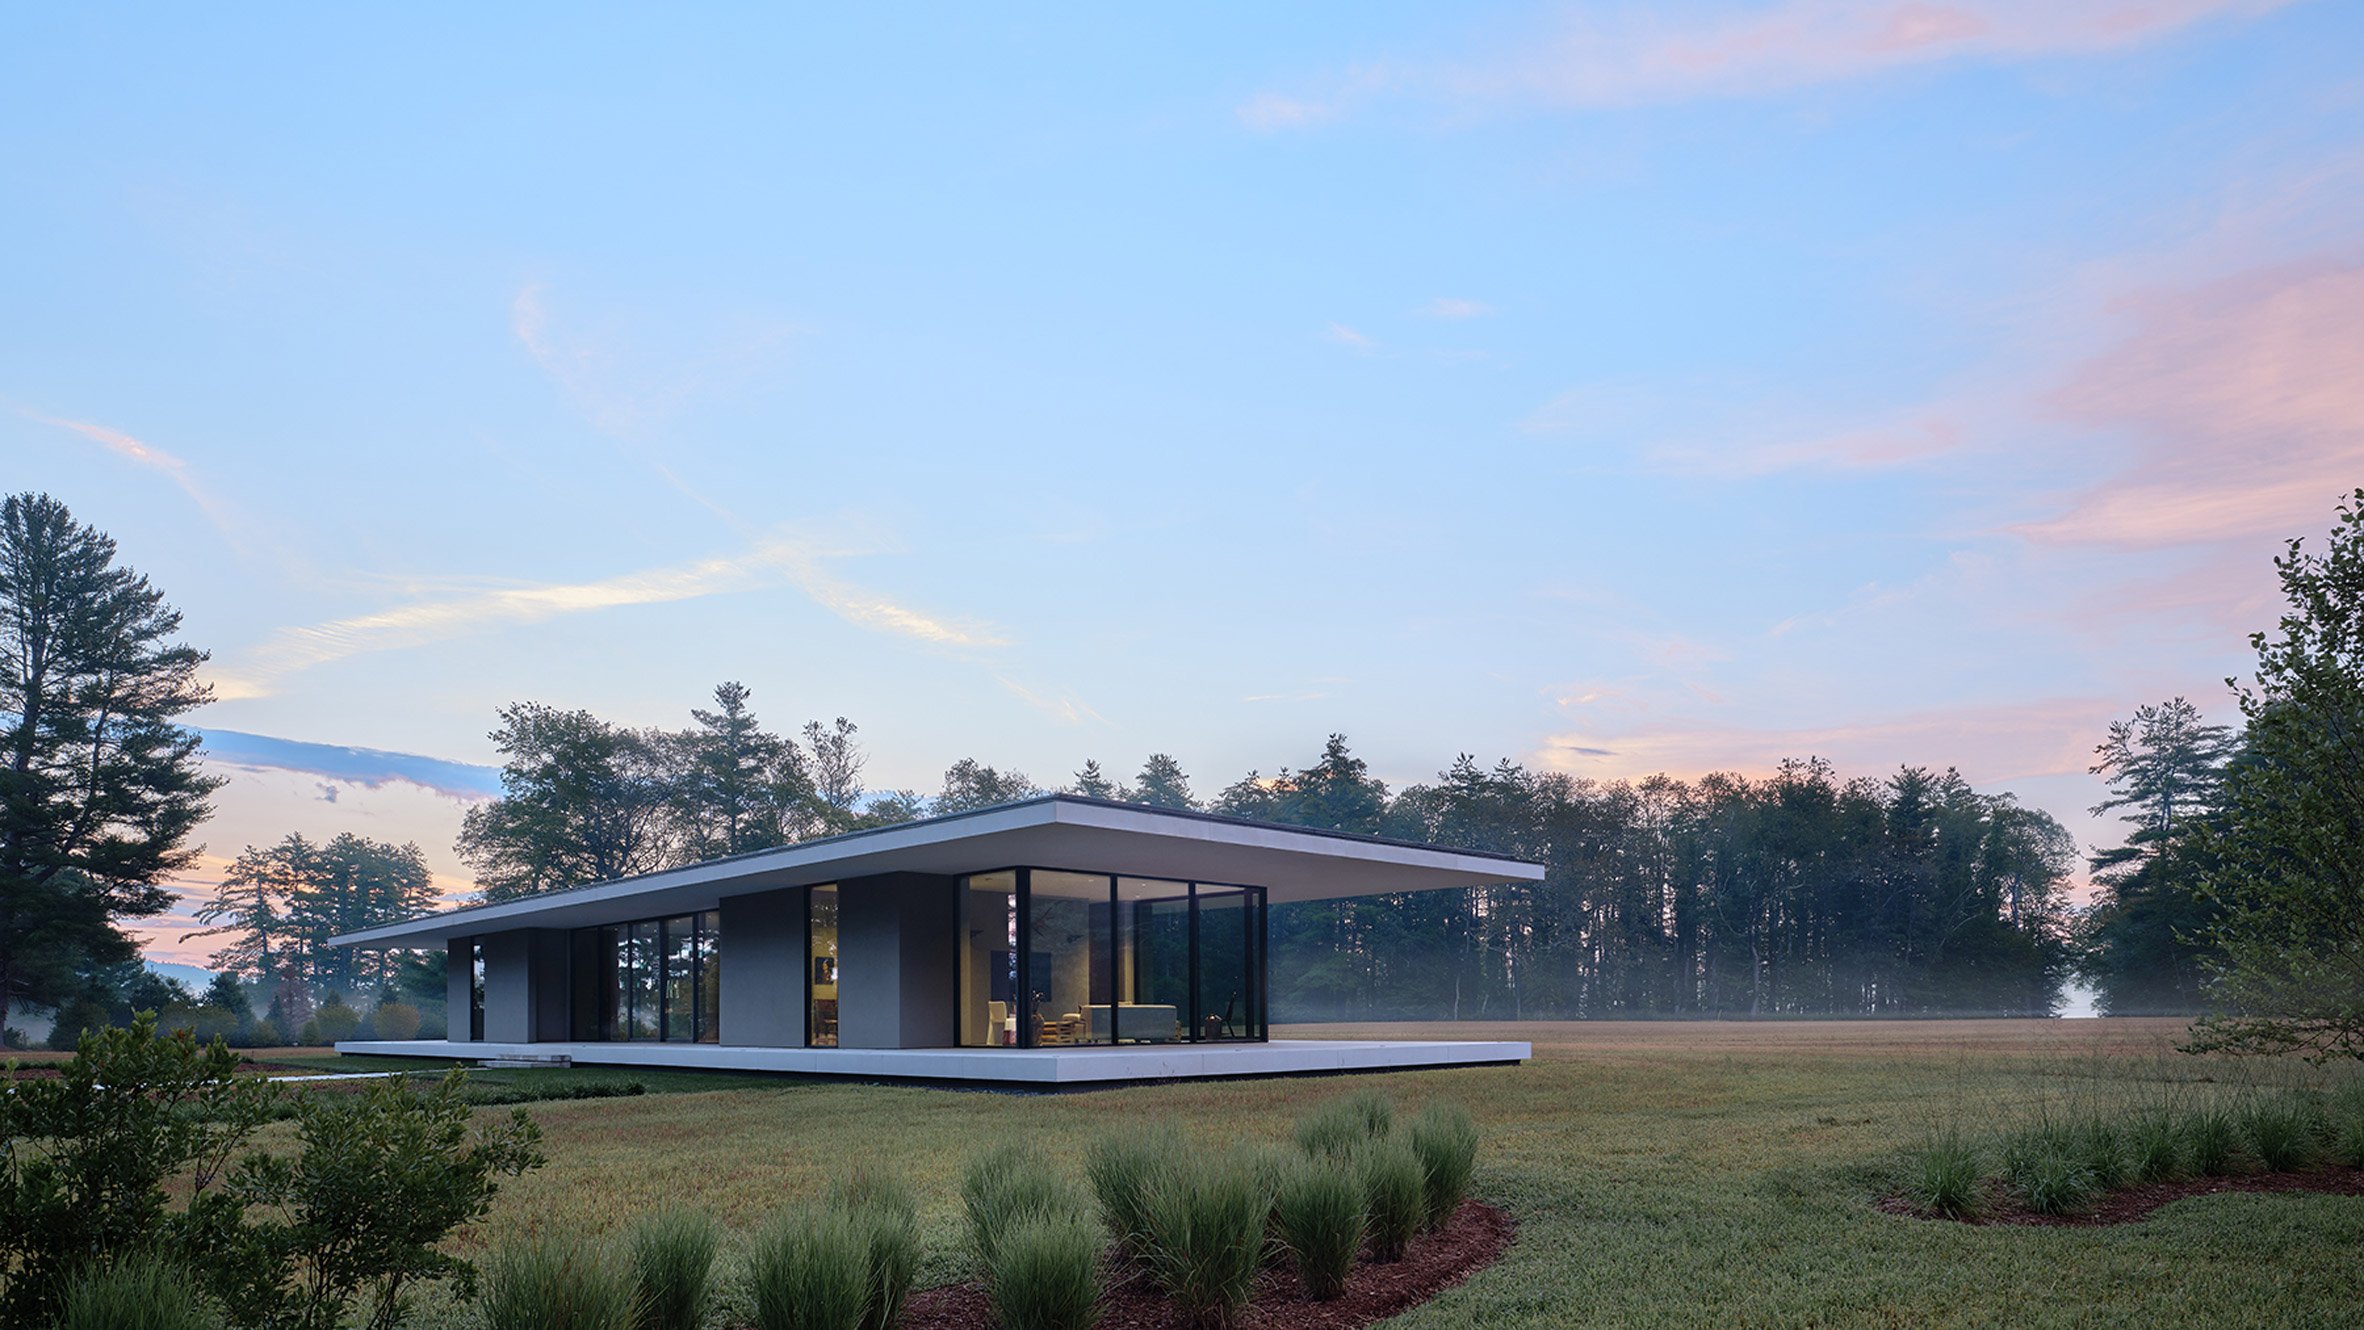 Replanted natural grasses surrounding bungalow-style glass house with large overhangs by Specht Architects